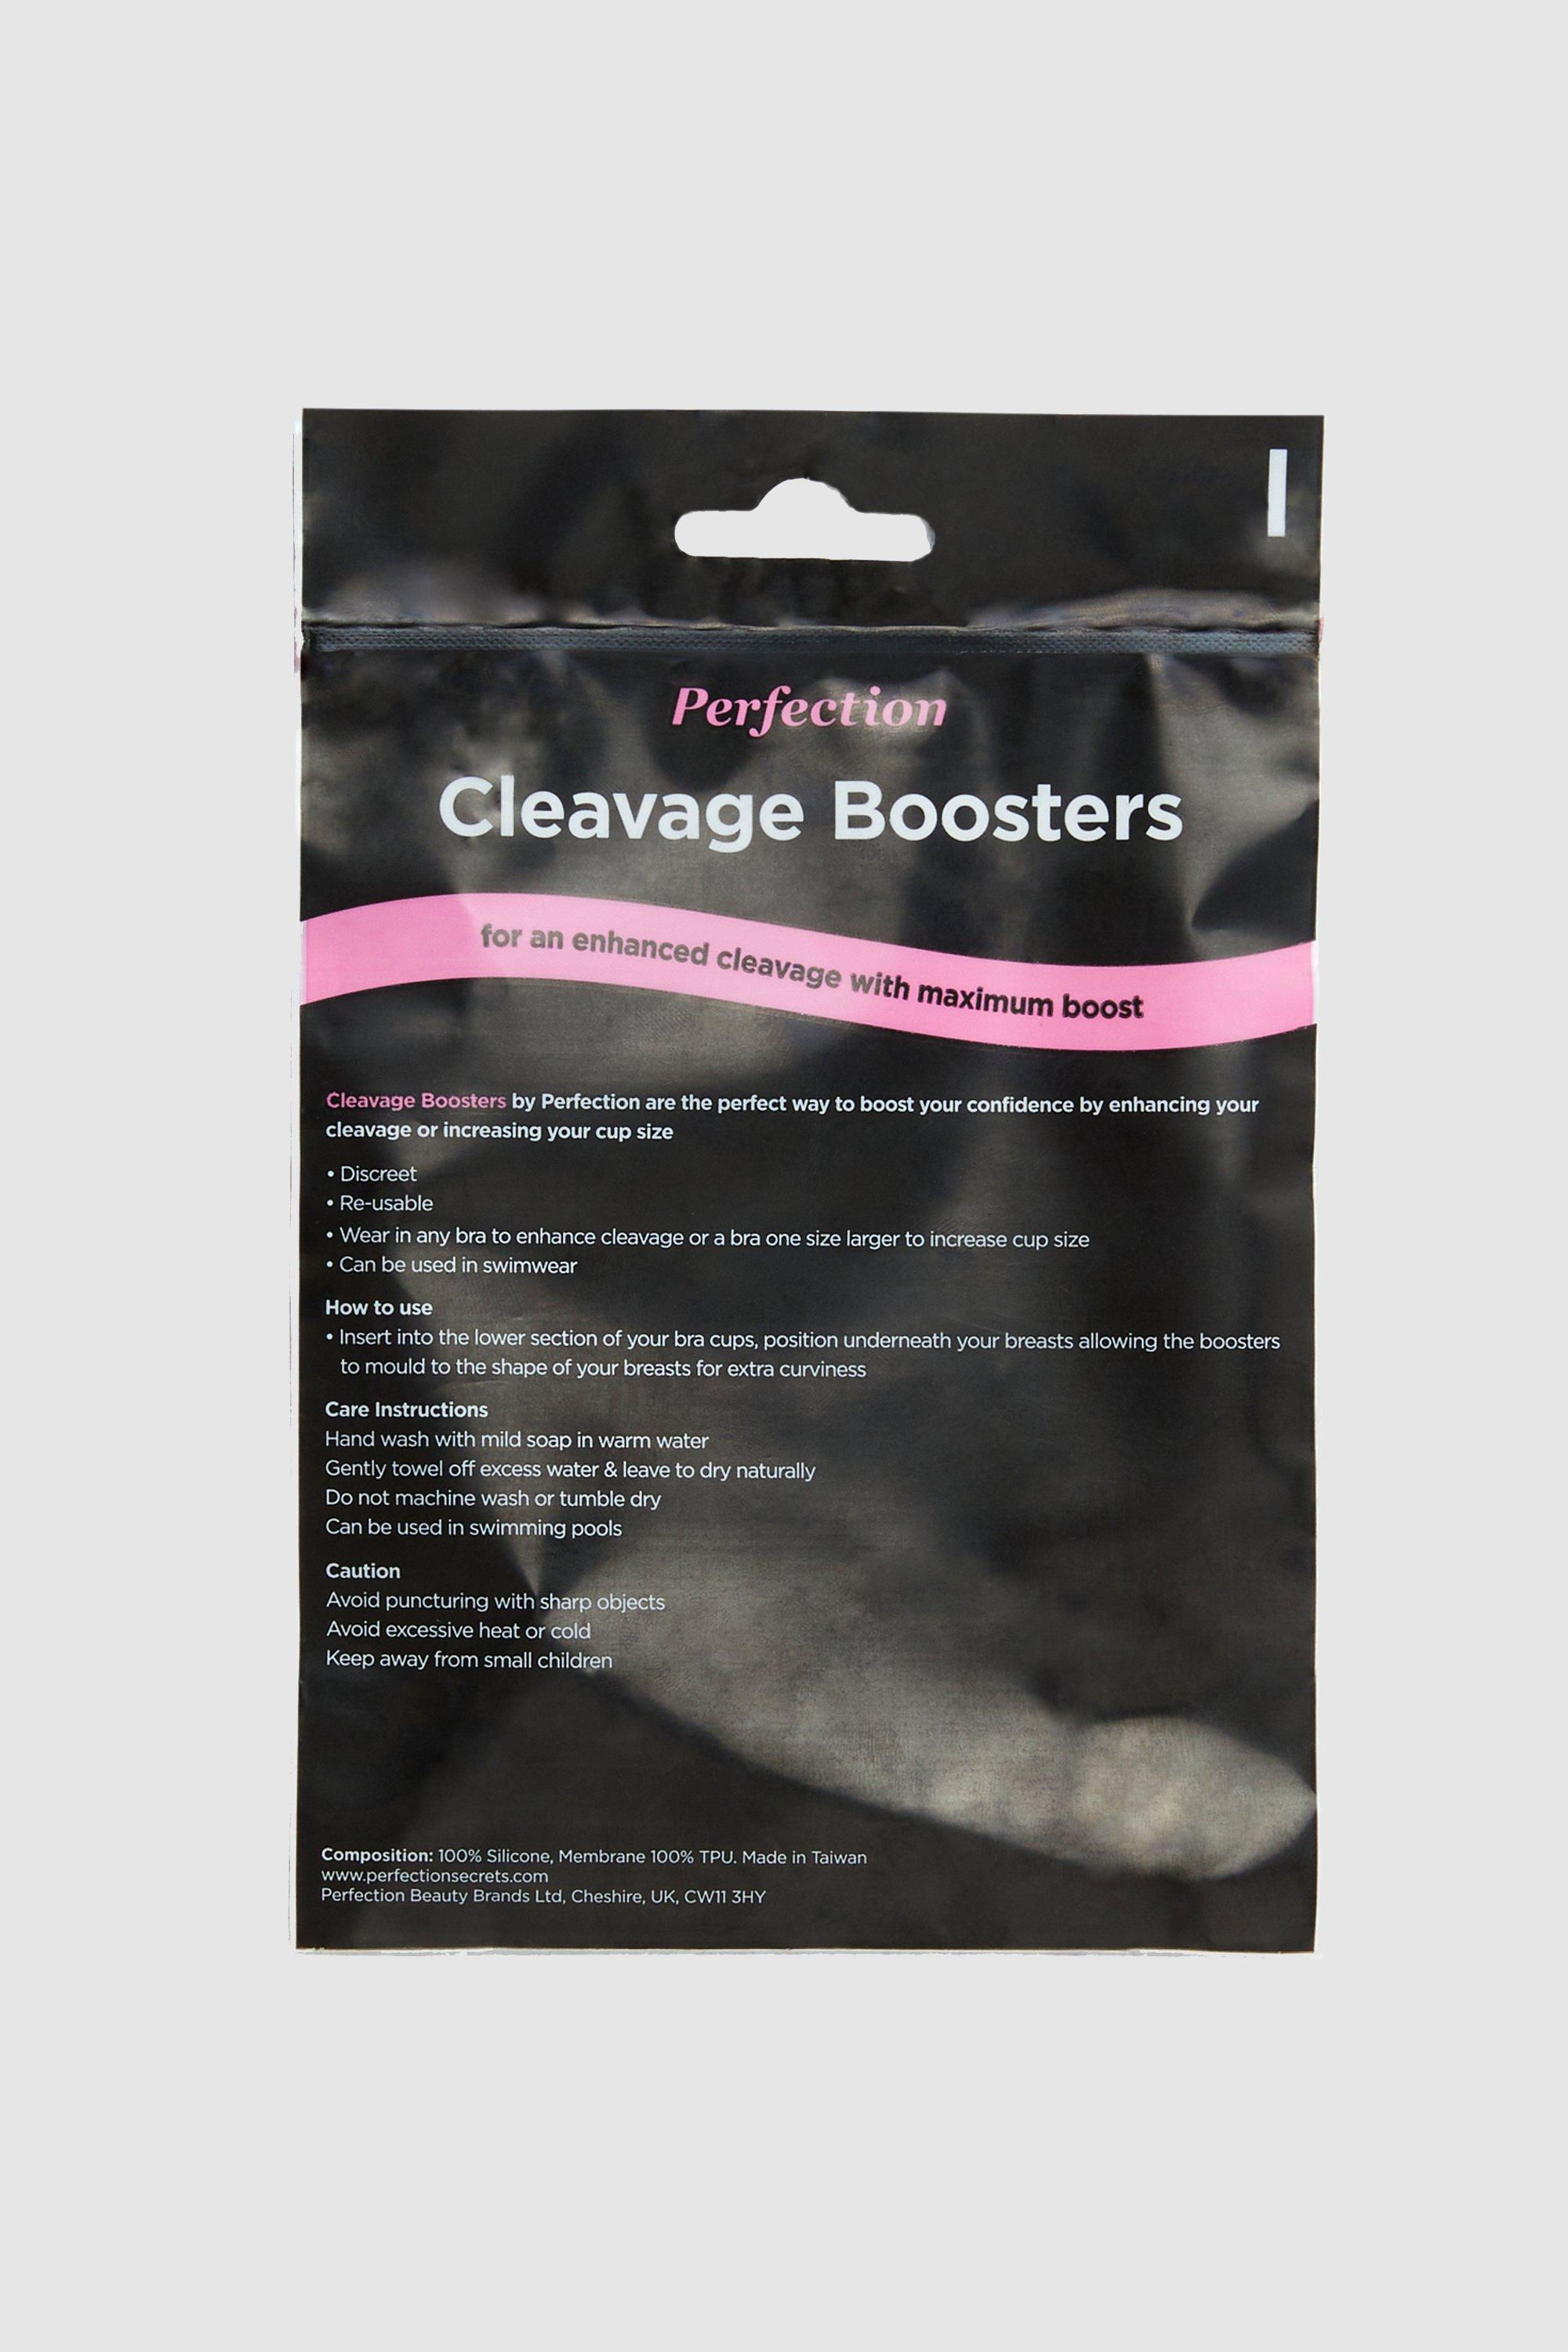 Cleavage Boosters